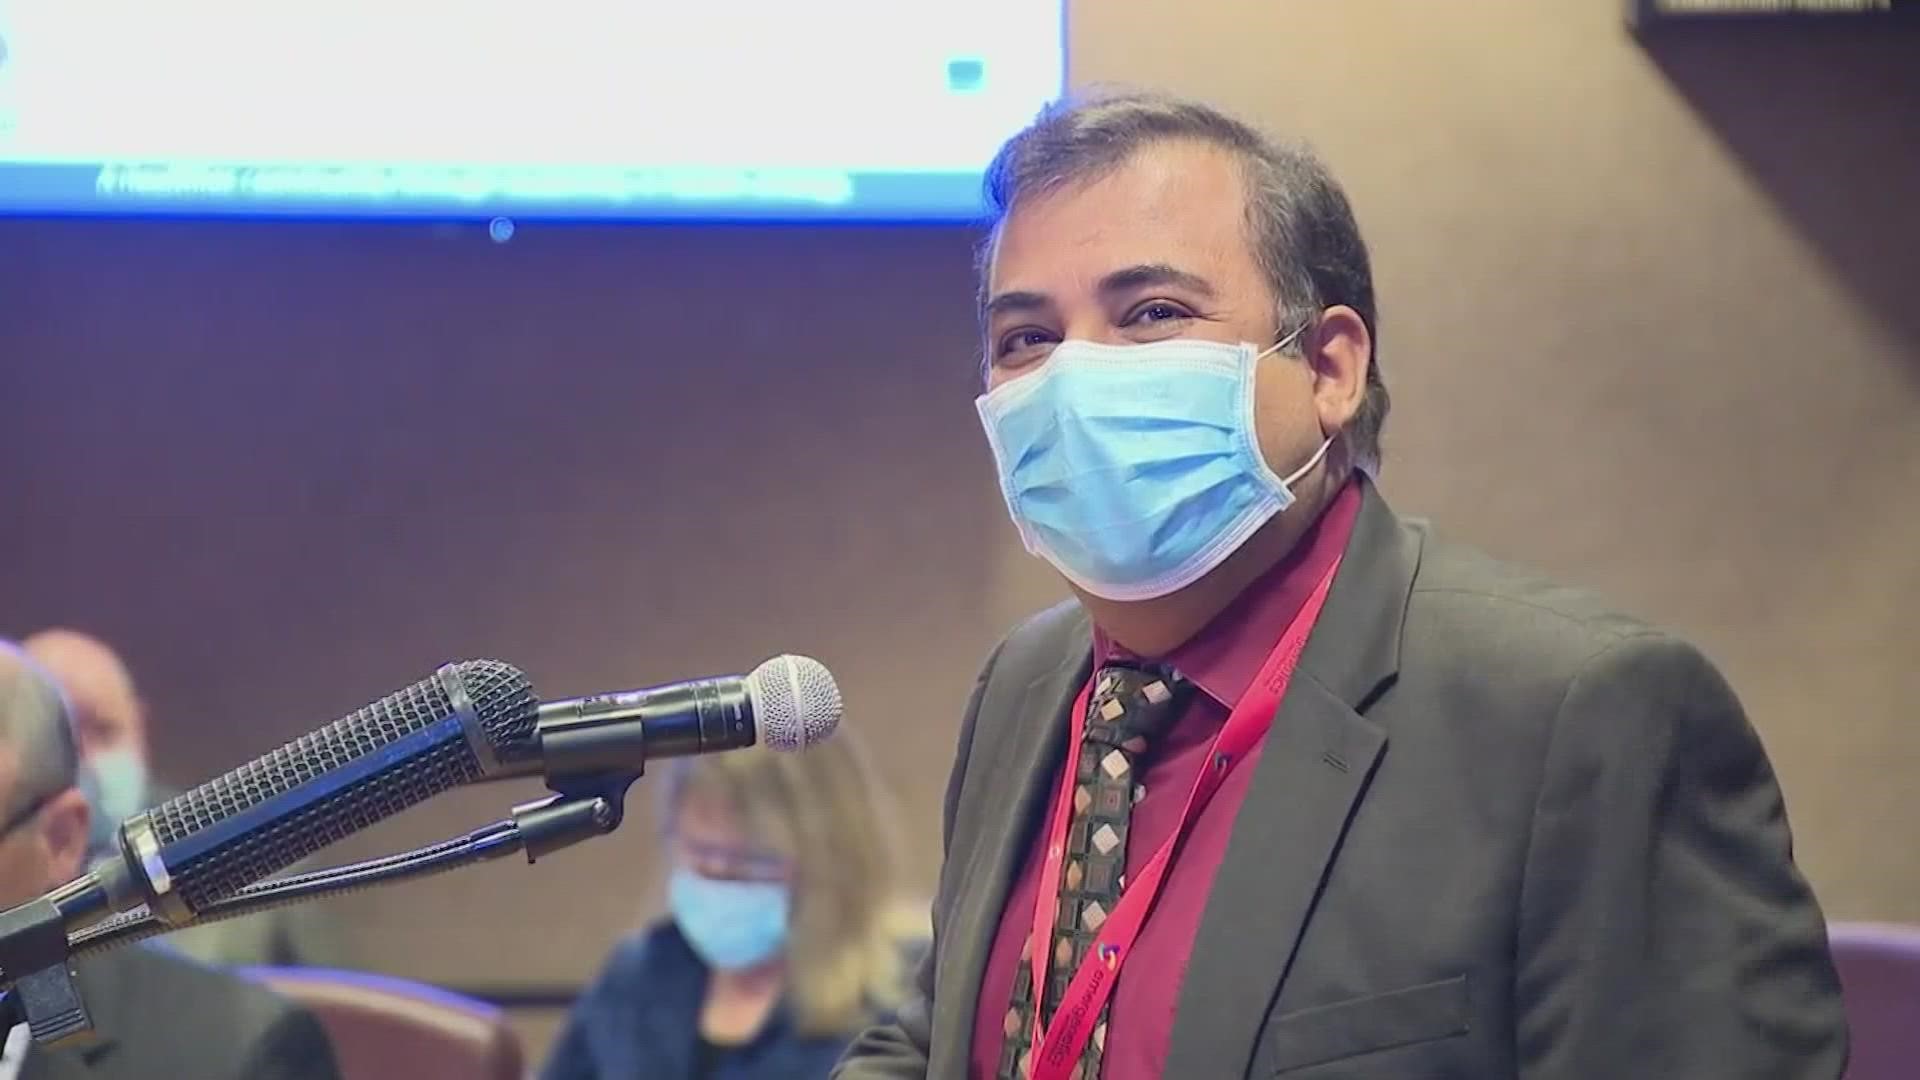 Data shows the positivity rate in Tarrant County is just over 35%, a number public health director Vinny Taneja said is “a record high for the pandemic."